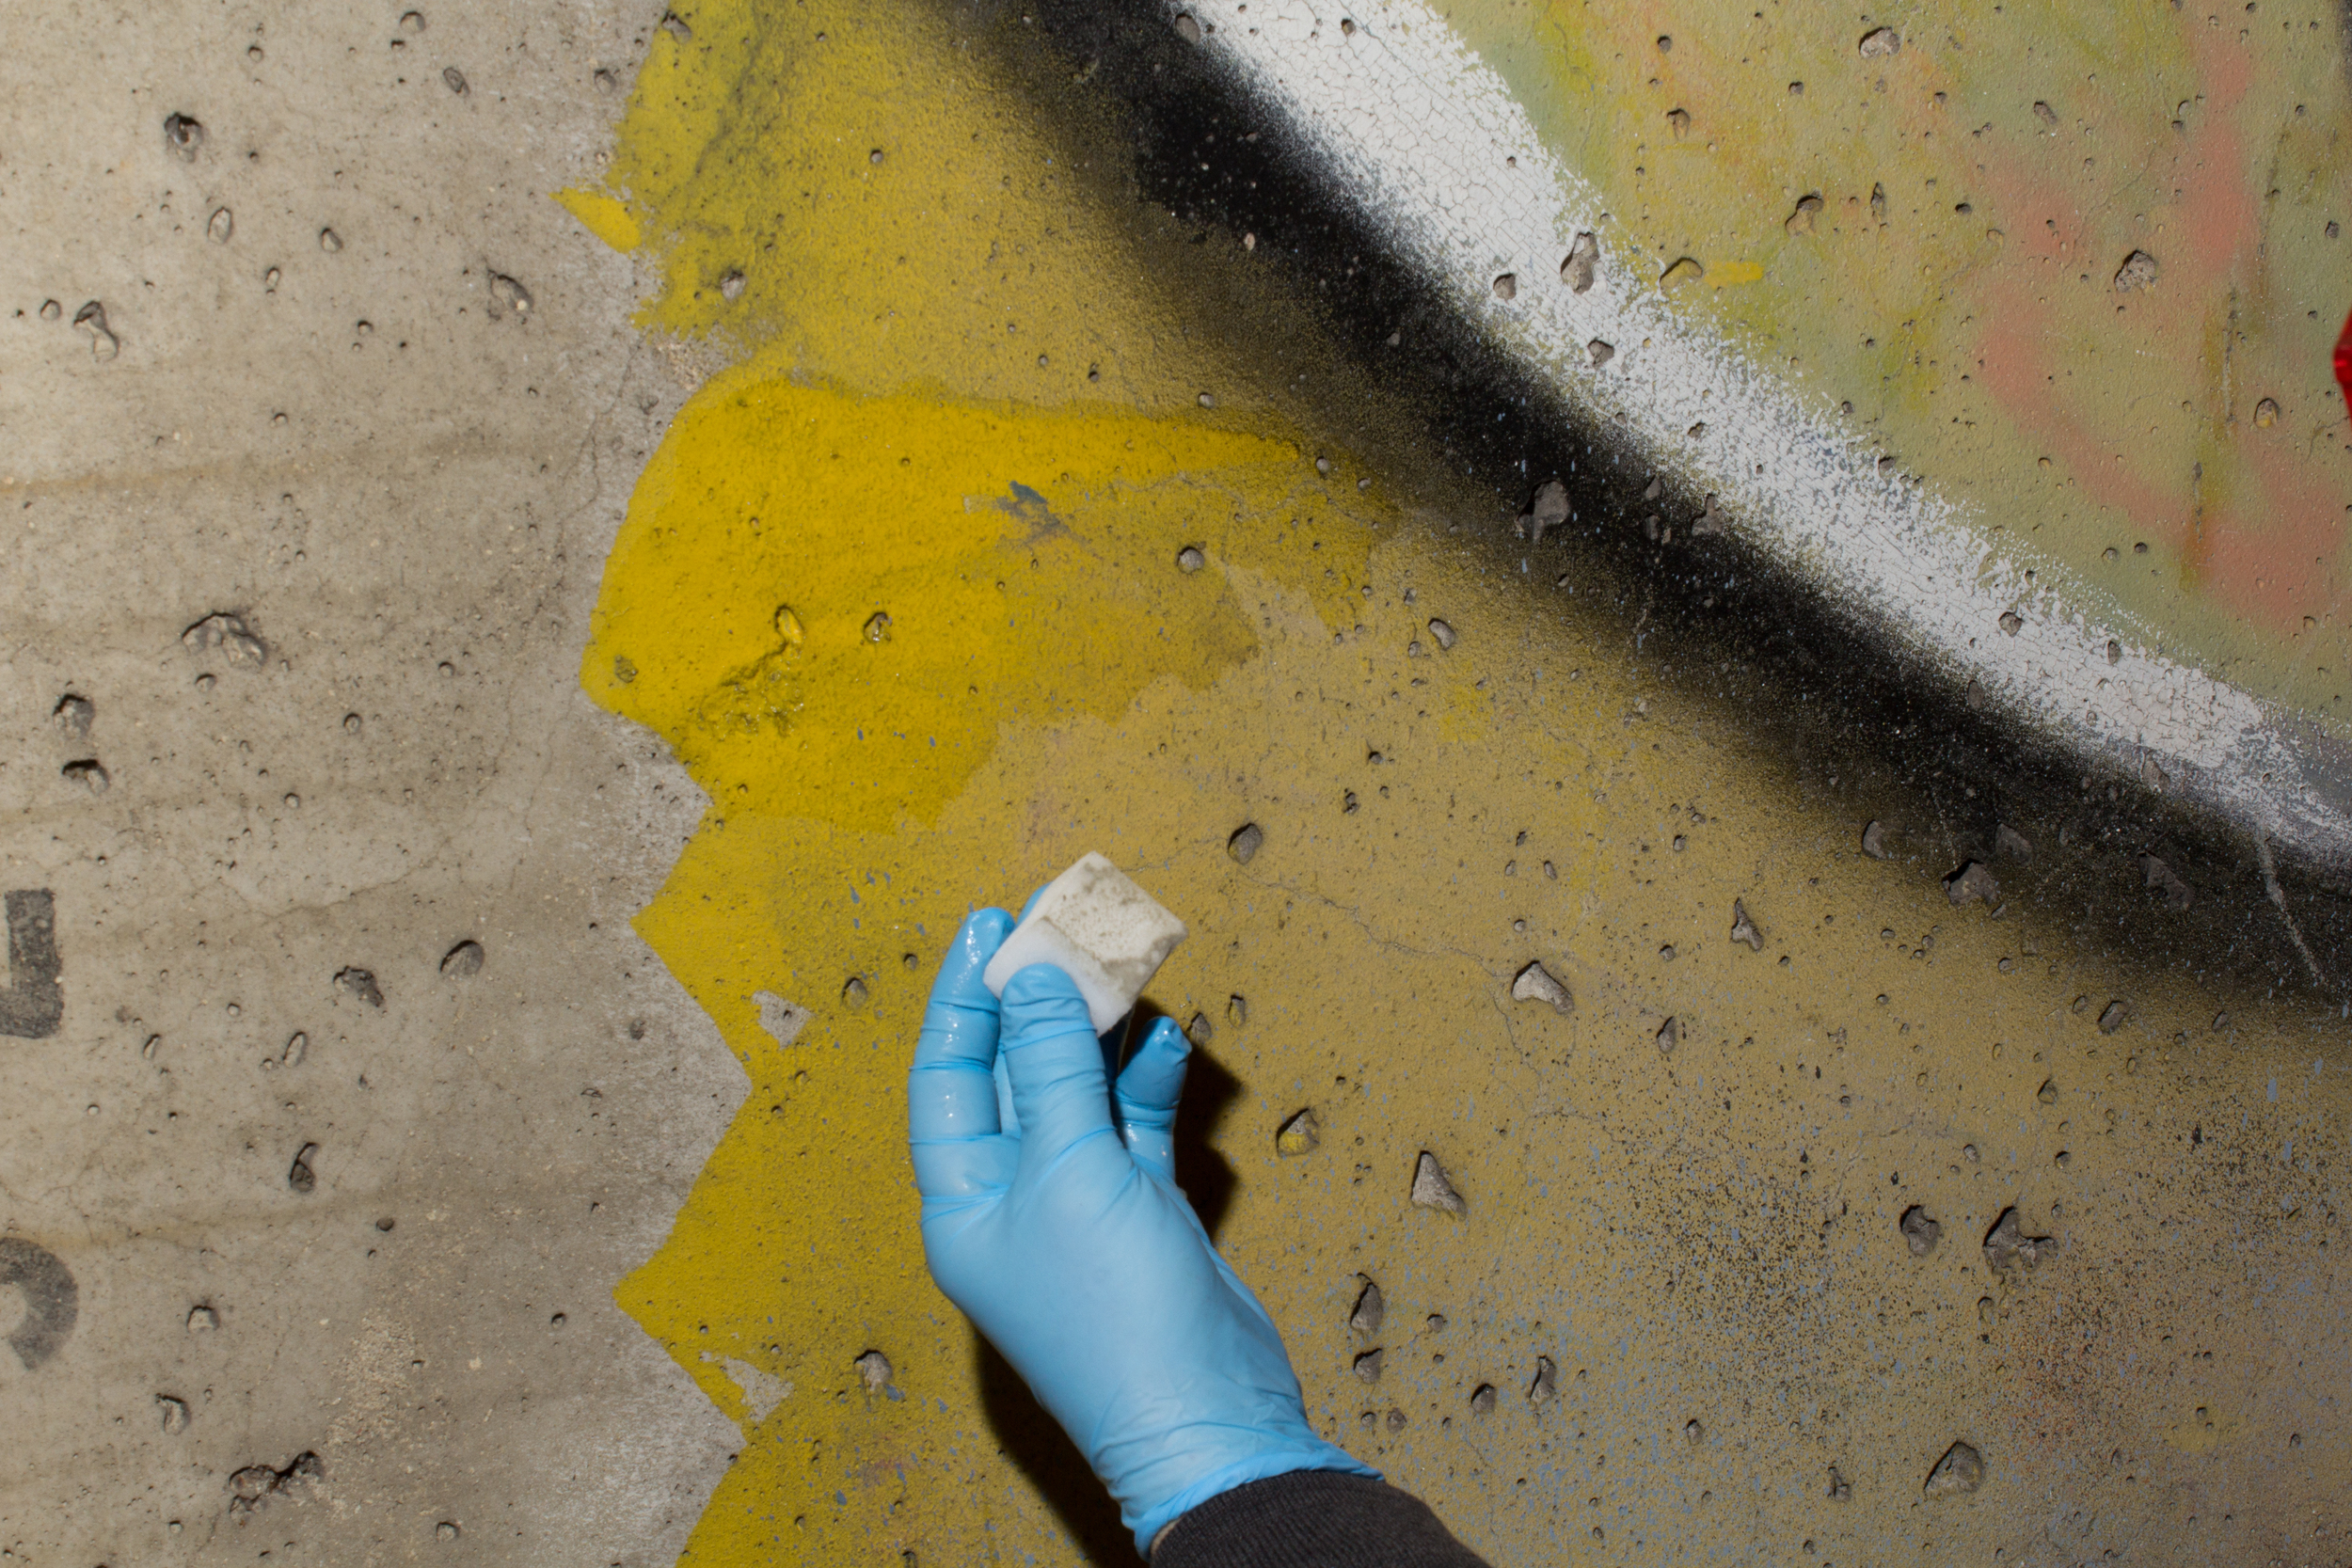  As a result of its outdoor, urban environment, the painted surface was covered by a layer of superficial dirt and dust. It was removed with soft, damp sponges.  Image   
  
 
  
    
  
 Normal 
 0 
 
 
 
 
 false 
 false 
 false 
 
 EN-US 
 JA 
 X-